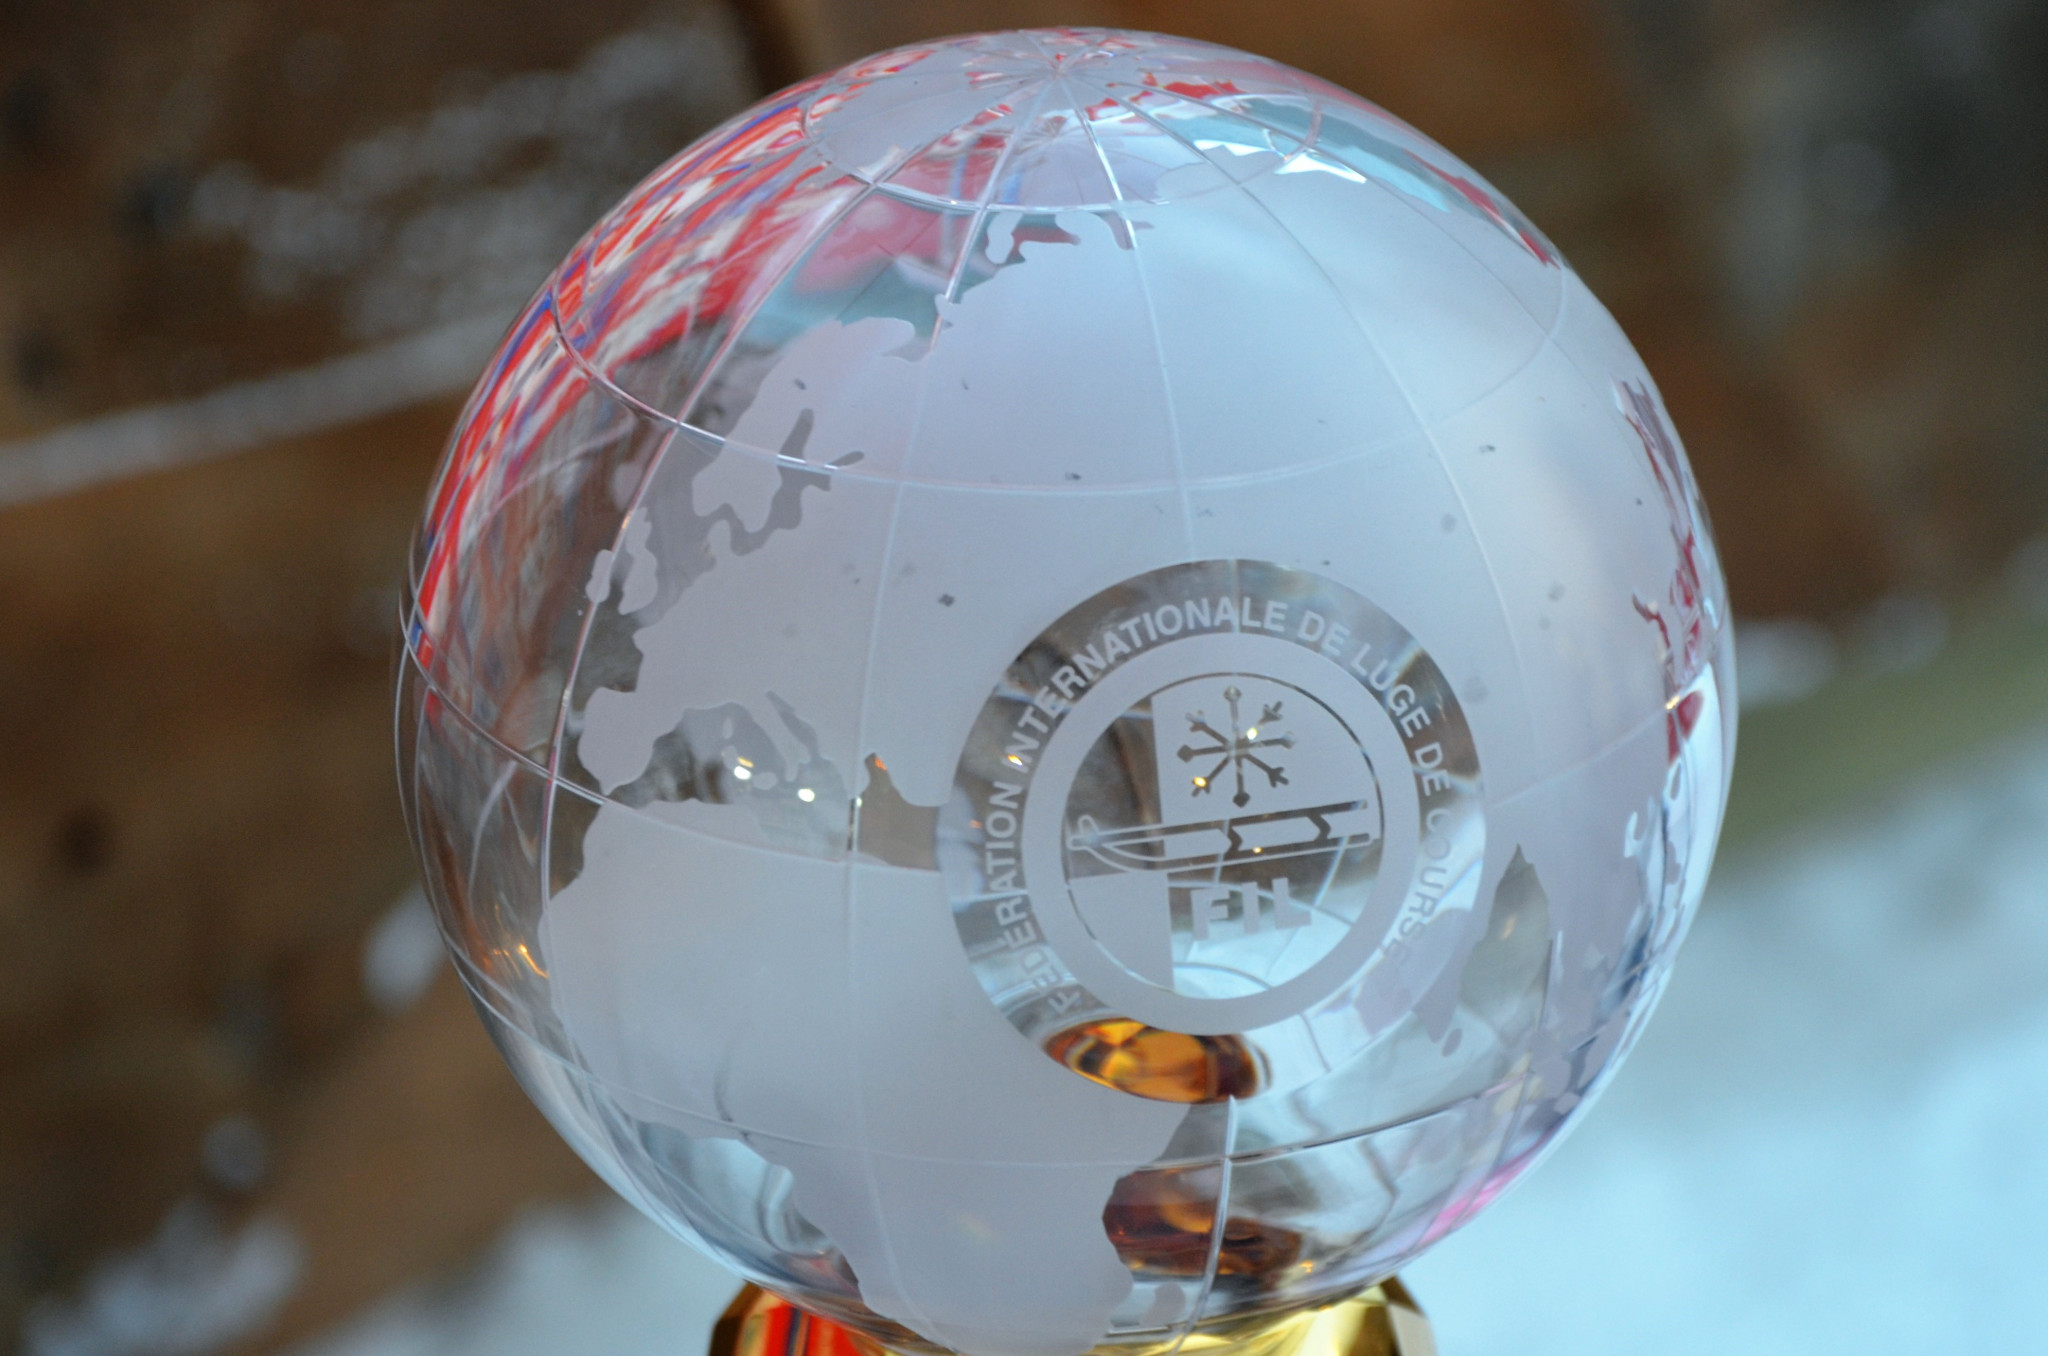 Large and small crystal globes will be awarded this season ©FIL